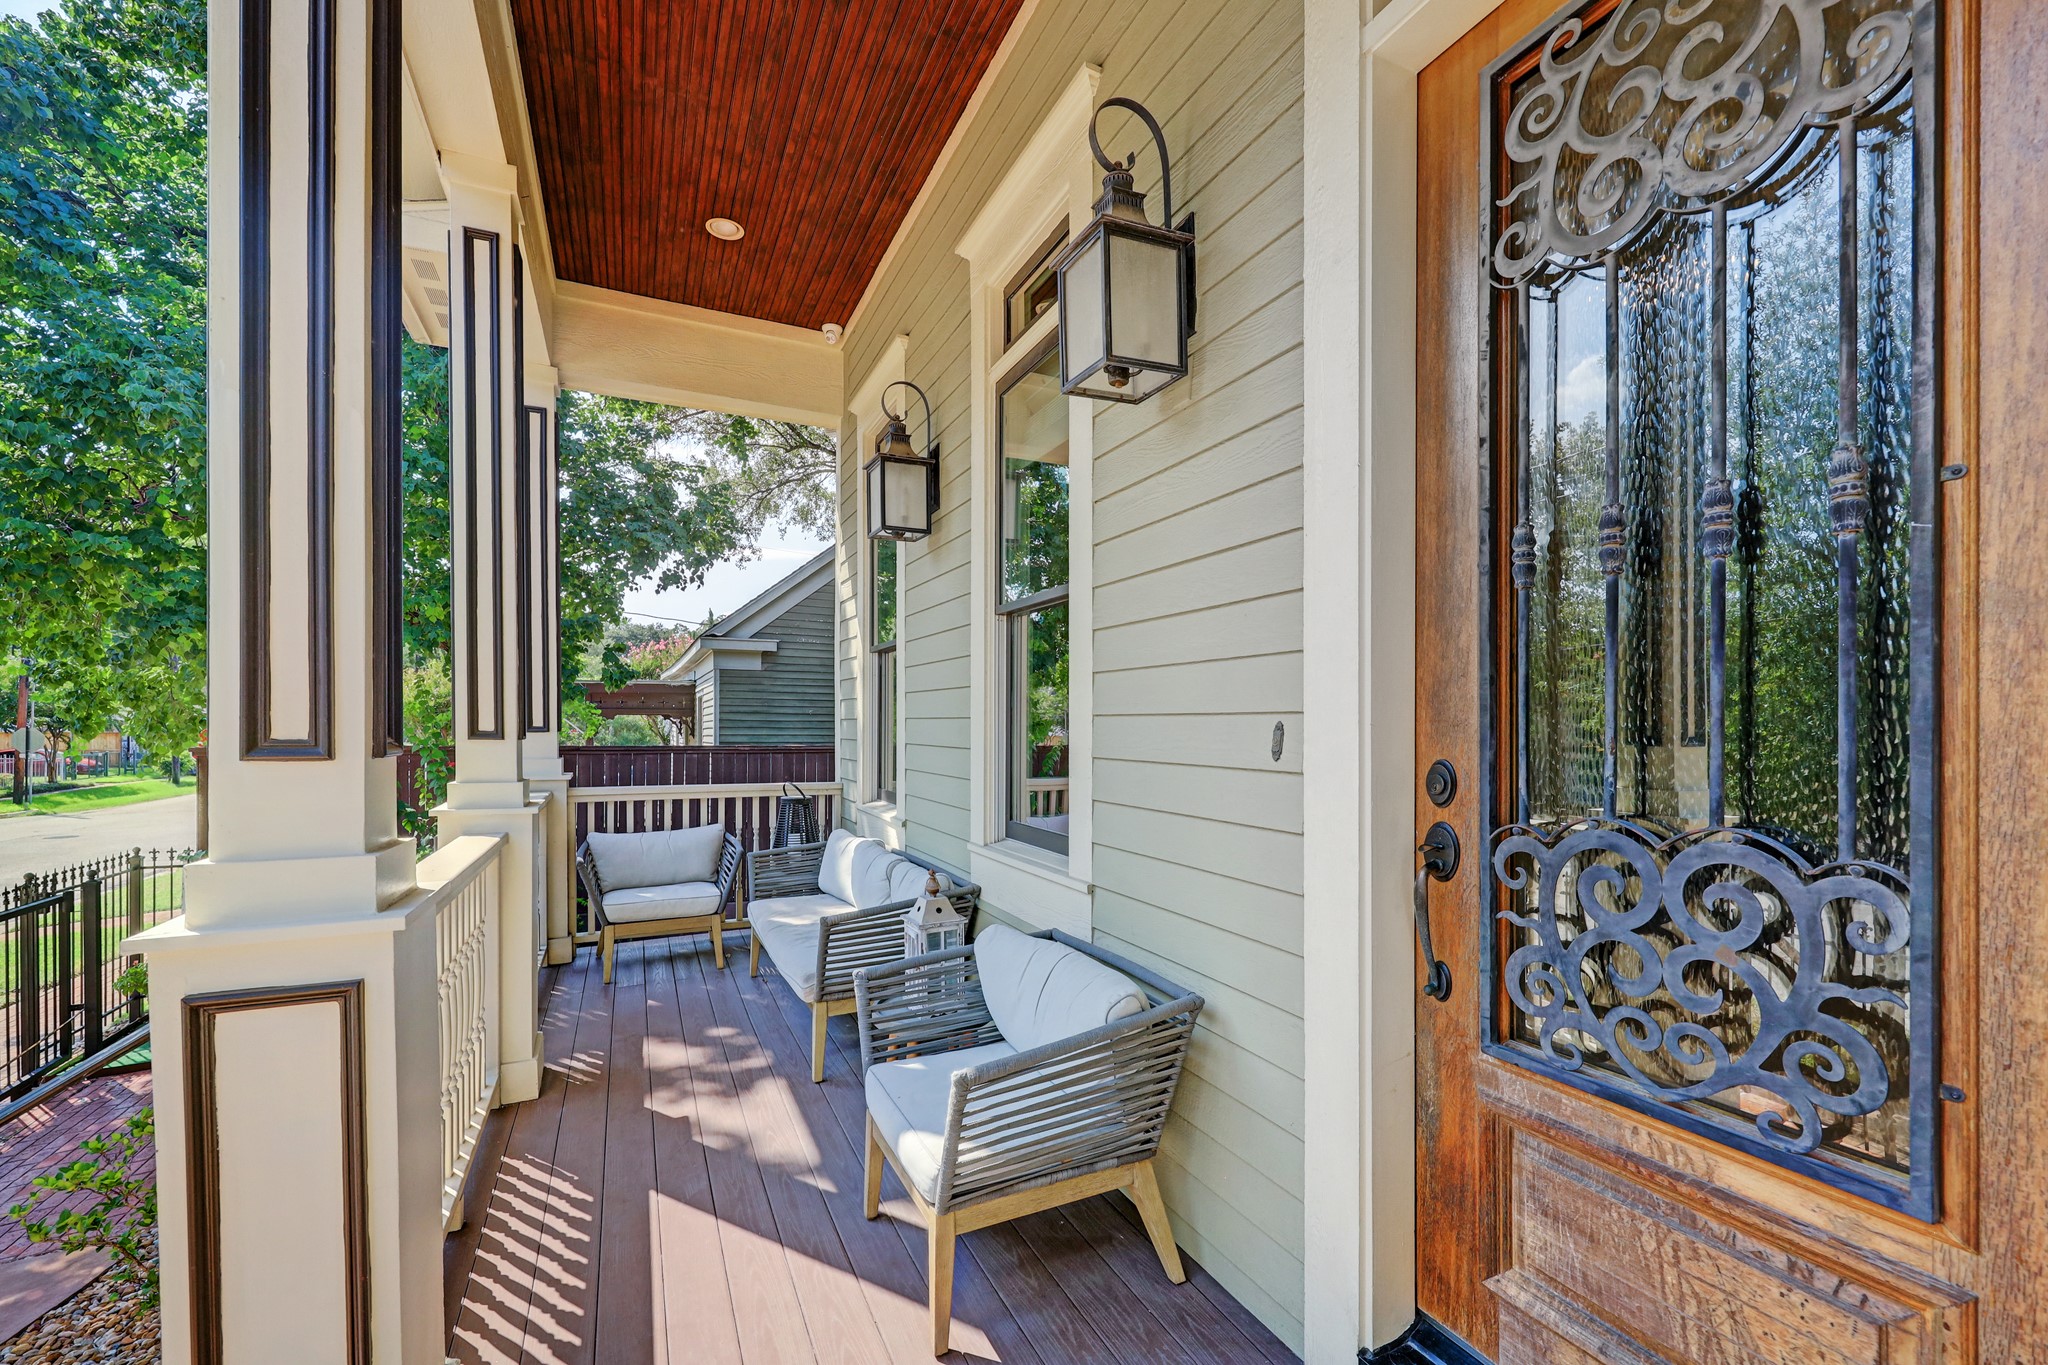 From the front porch to the rear elevated patio with summer kitchen, you will love the outdoor flexibility.
